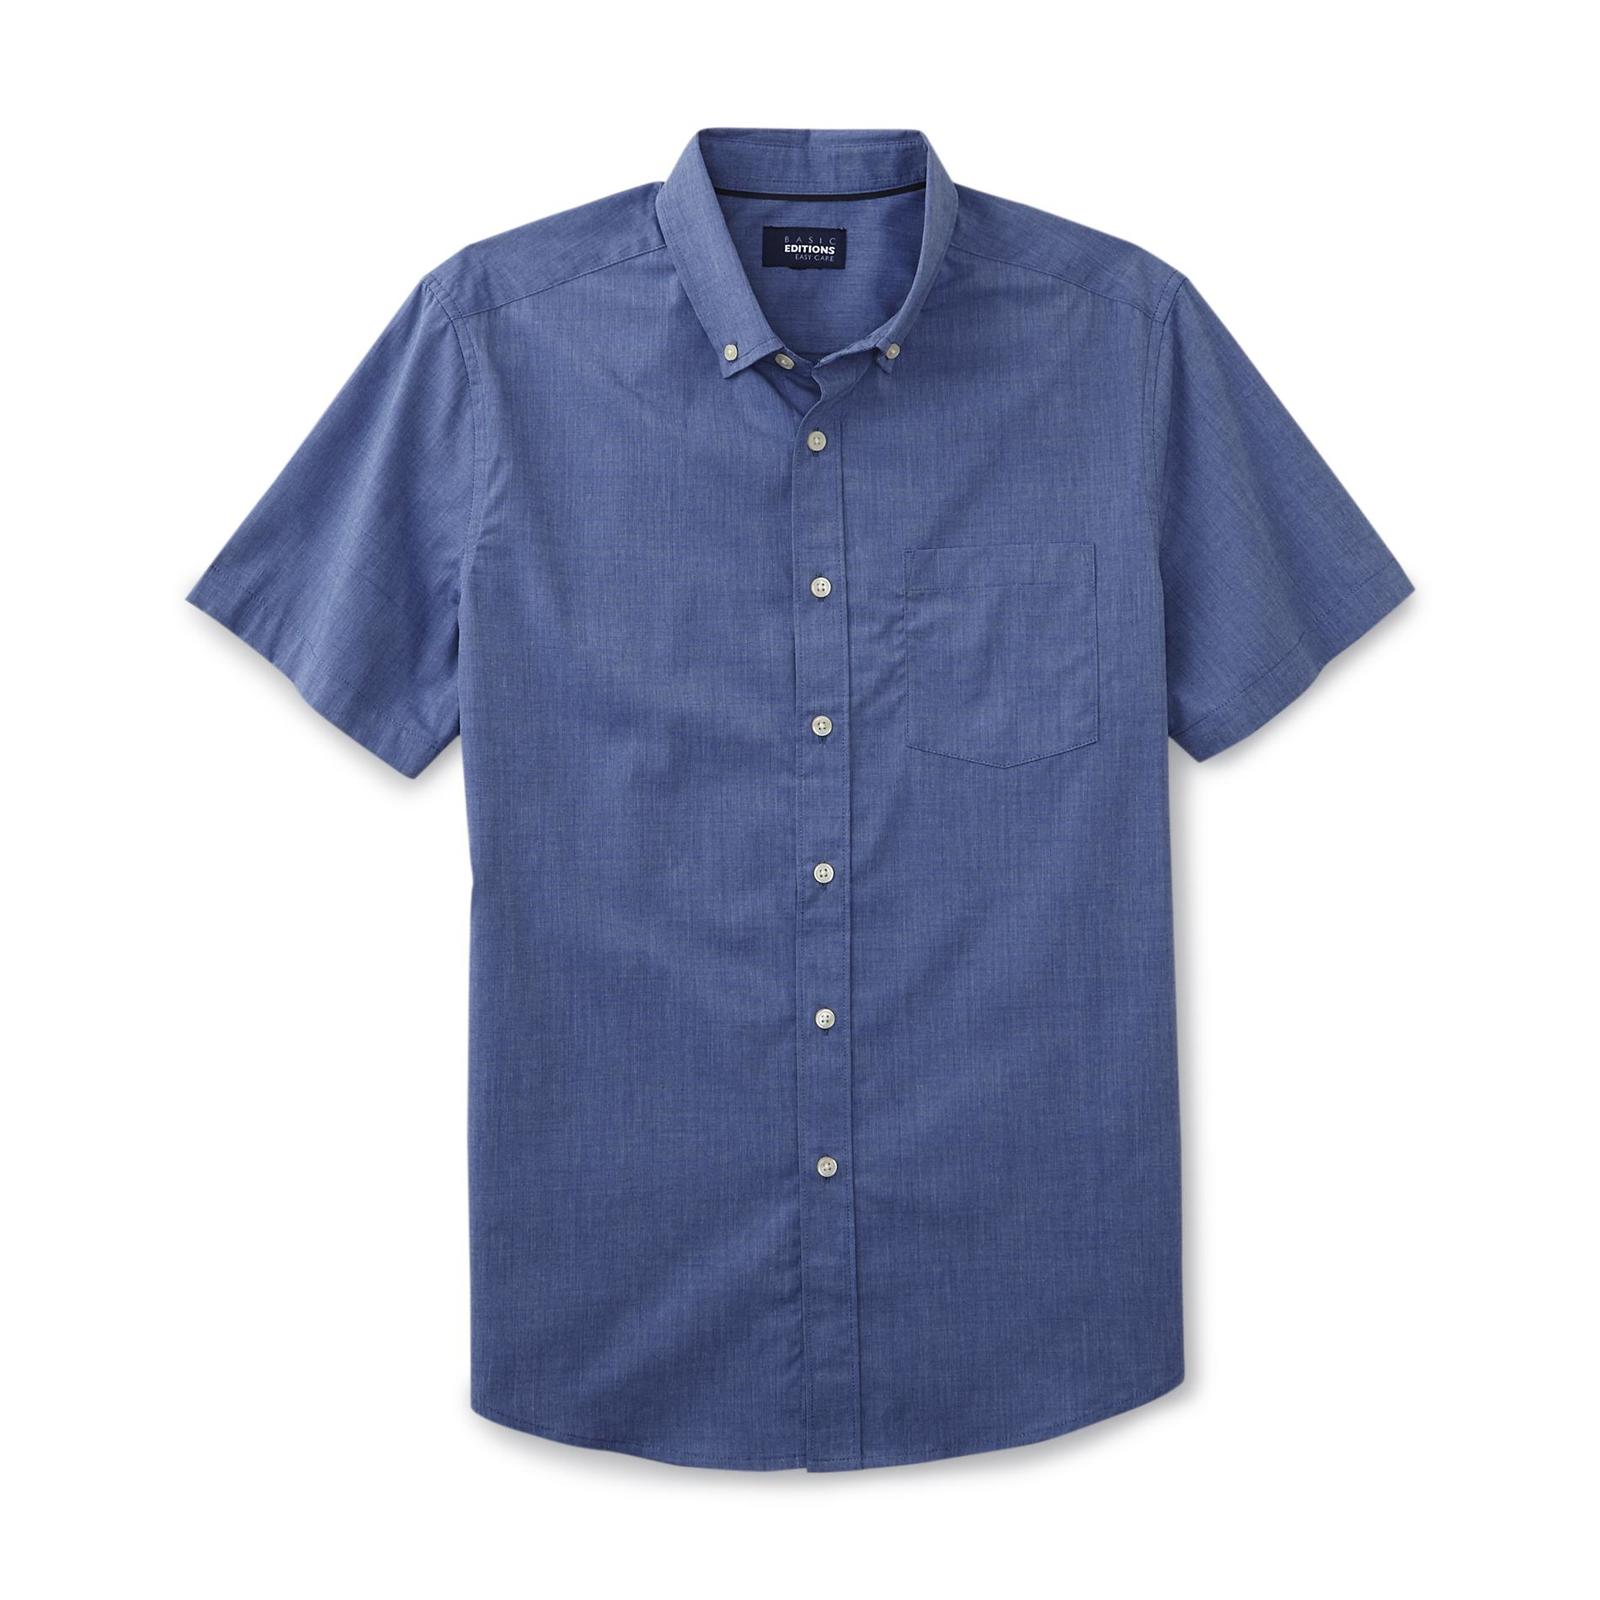 Basic Editions Men's Easy Care Button-Front Shirt